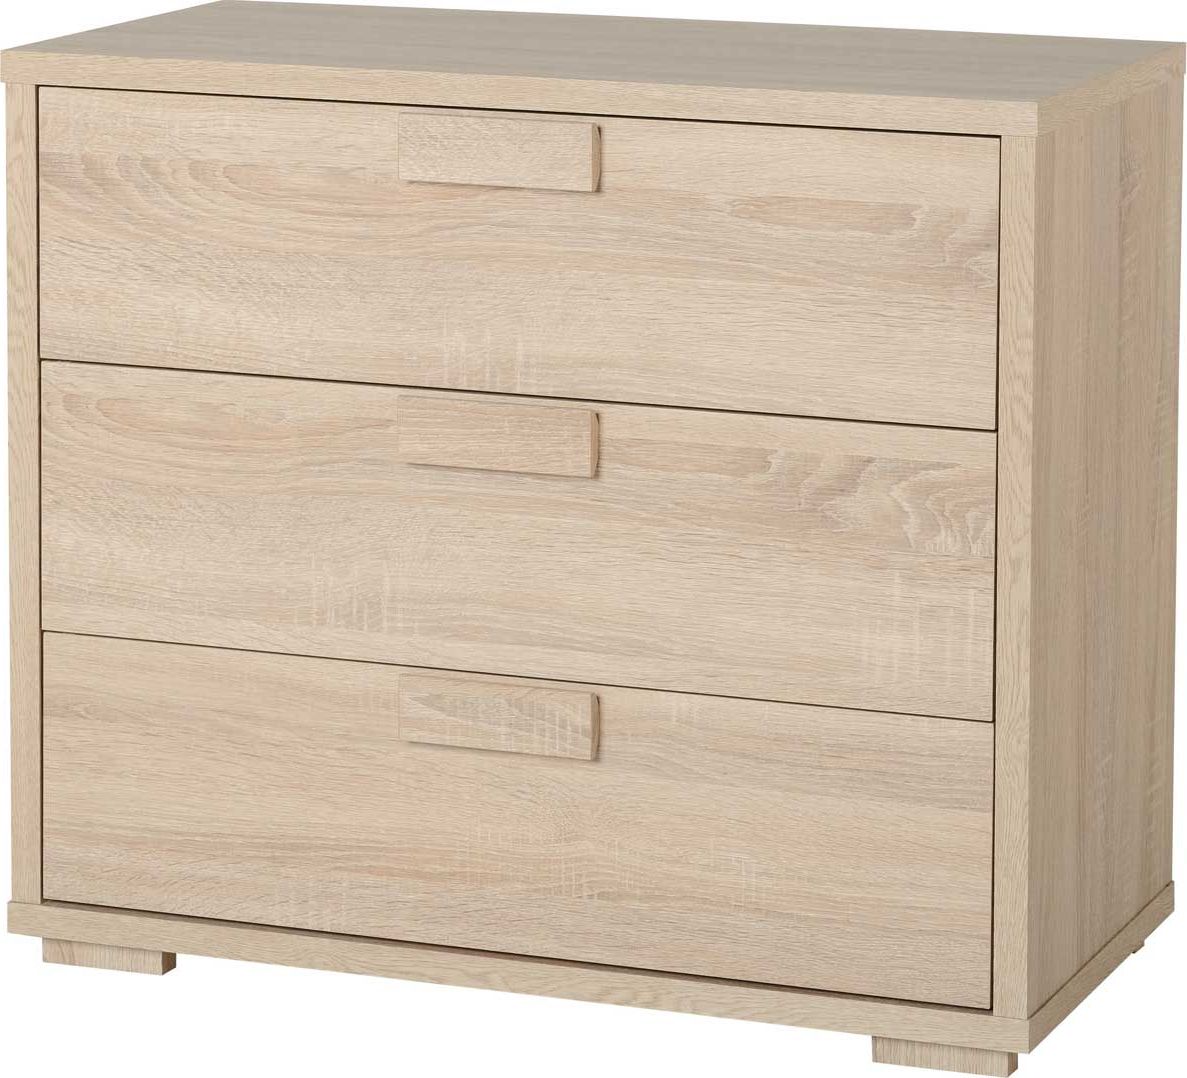 Seconique Cambourne 3 Drawer Chest Sonoma Oak Effect Within Cambourne Tv Stands (View 8 of 20)